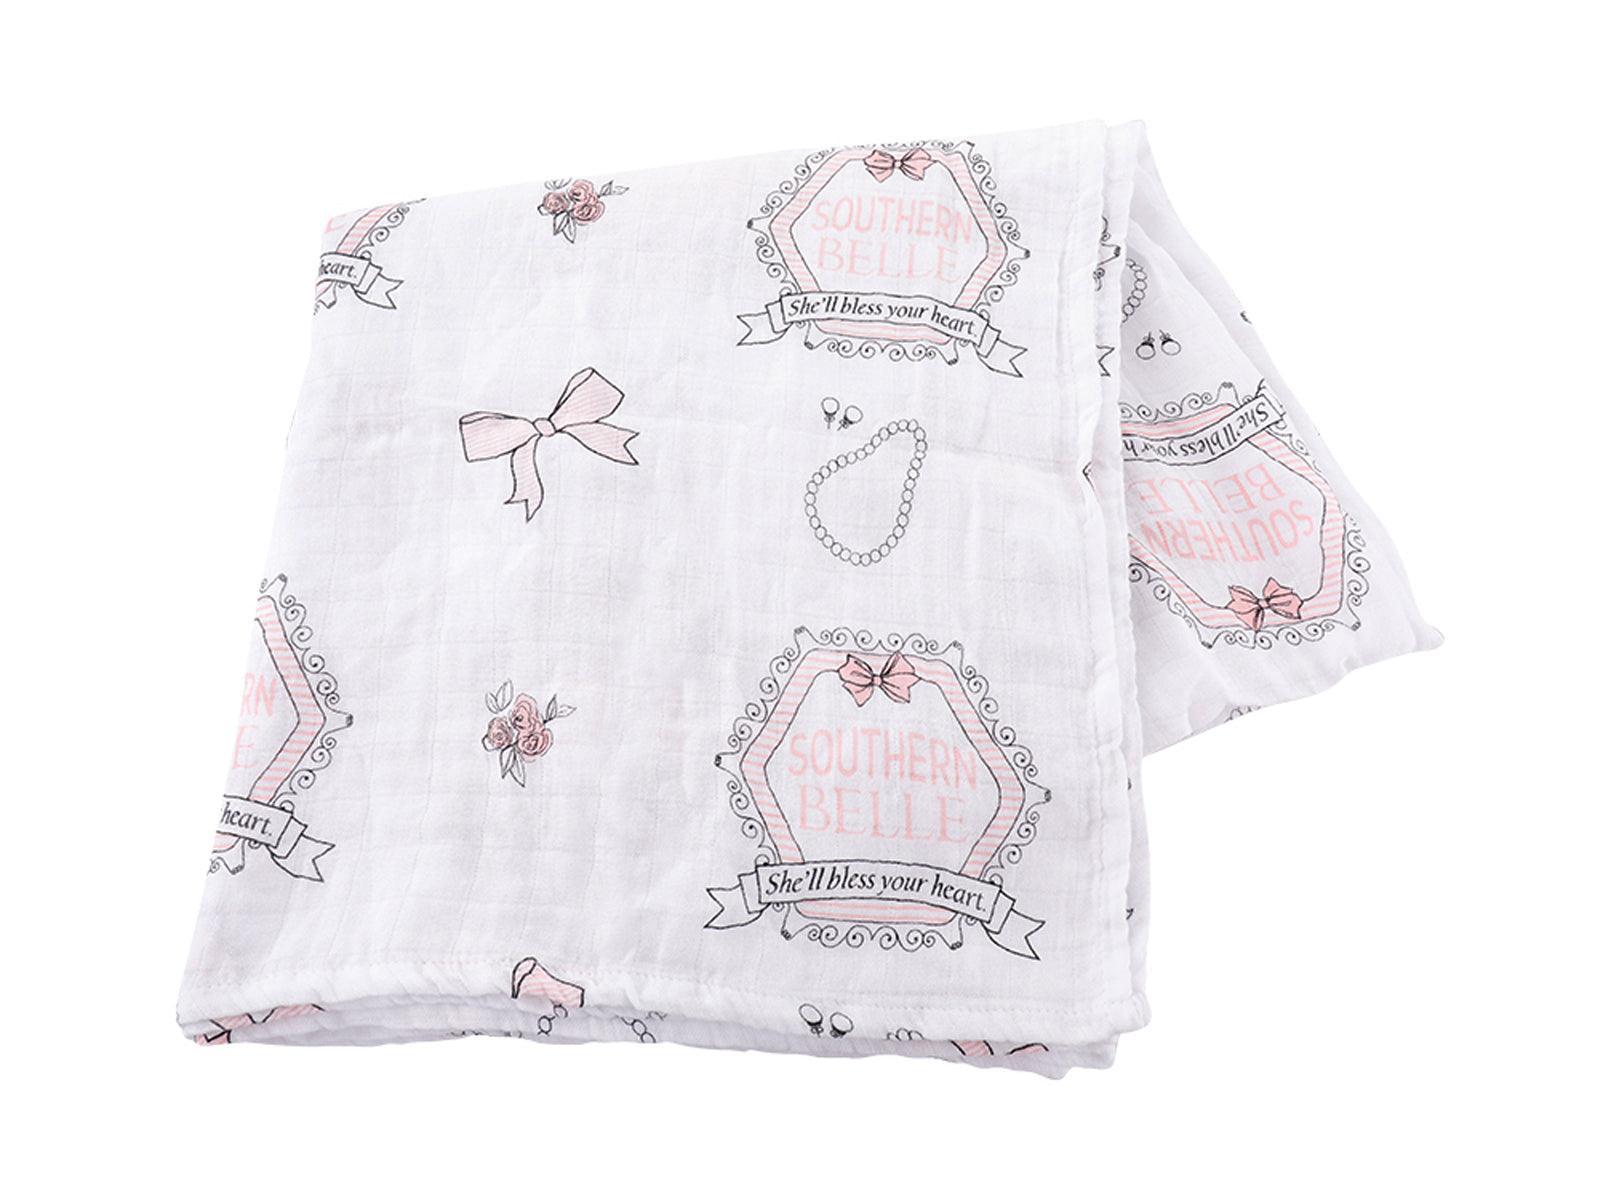 Southern Belle baby gift set with muslin swaddle blanket and burp cloth/bib combo, featuring floral patterns.